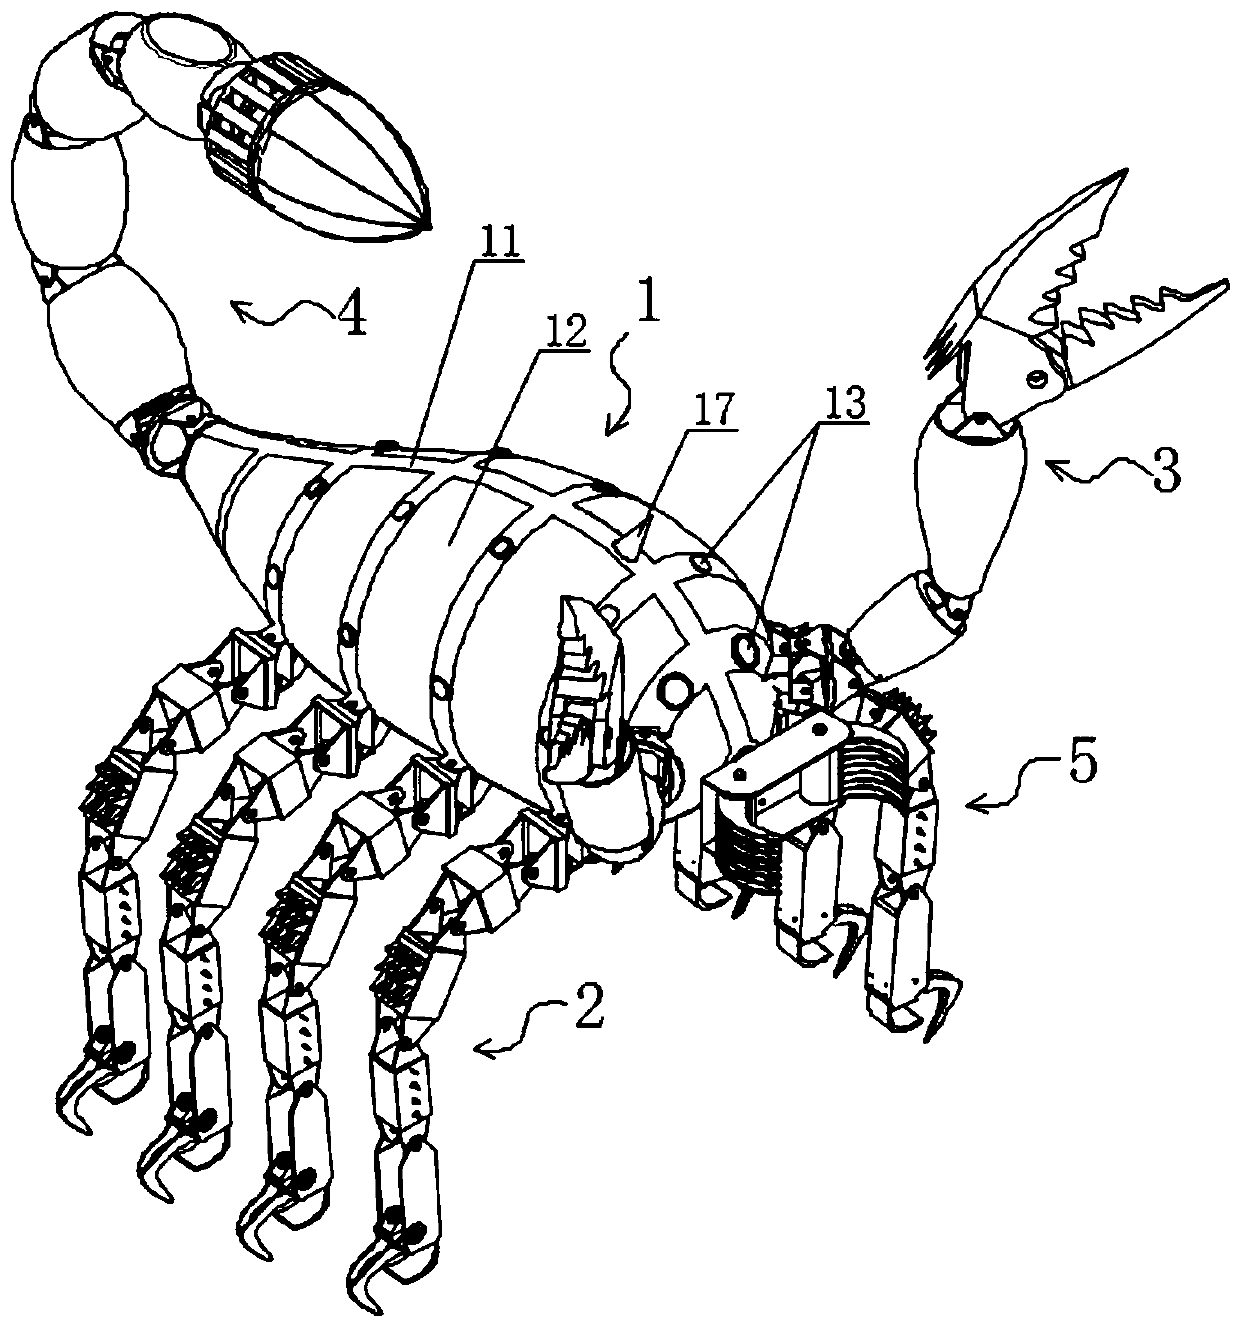 Scorpion-like security robot for office building or home